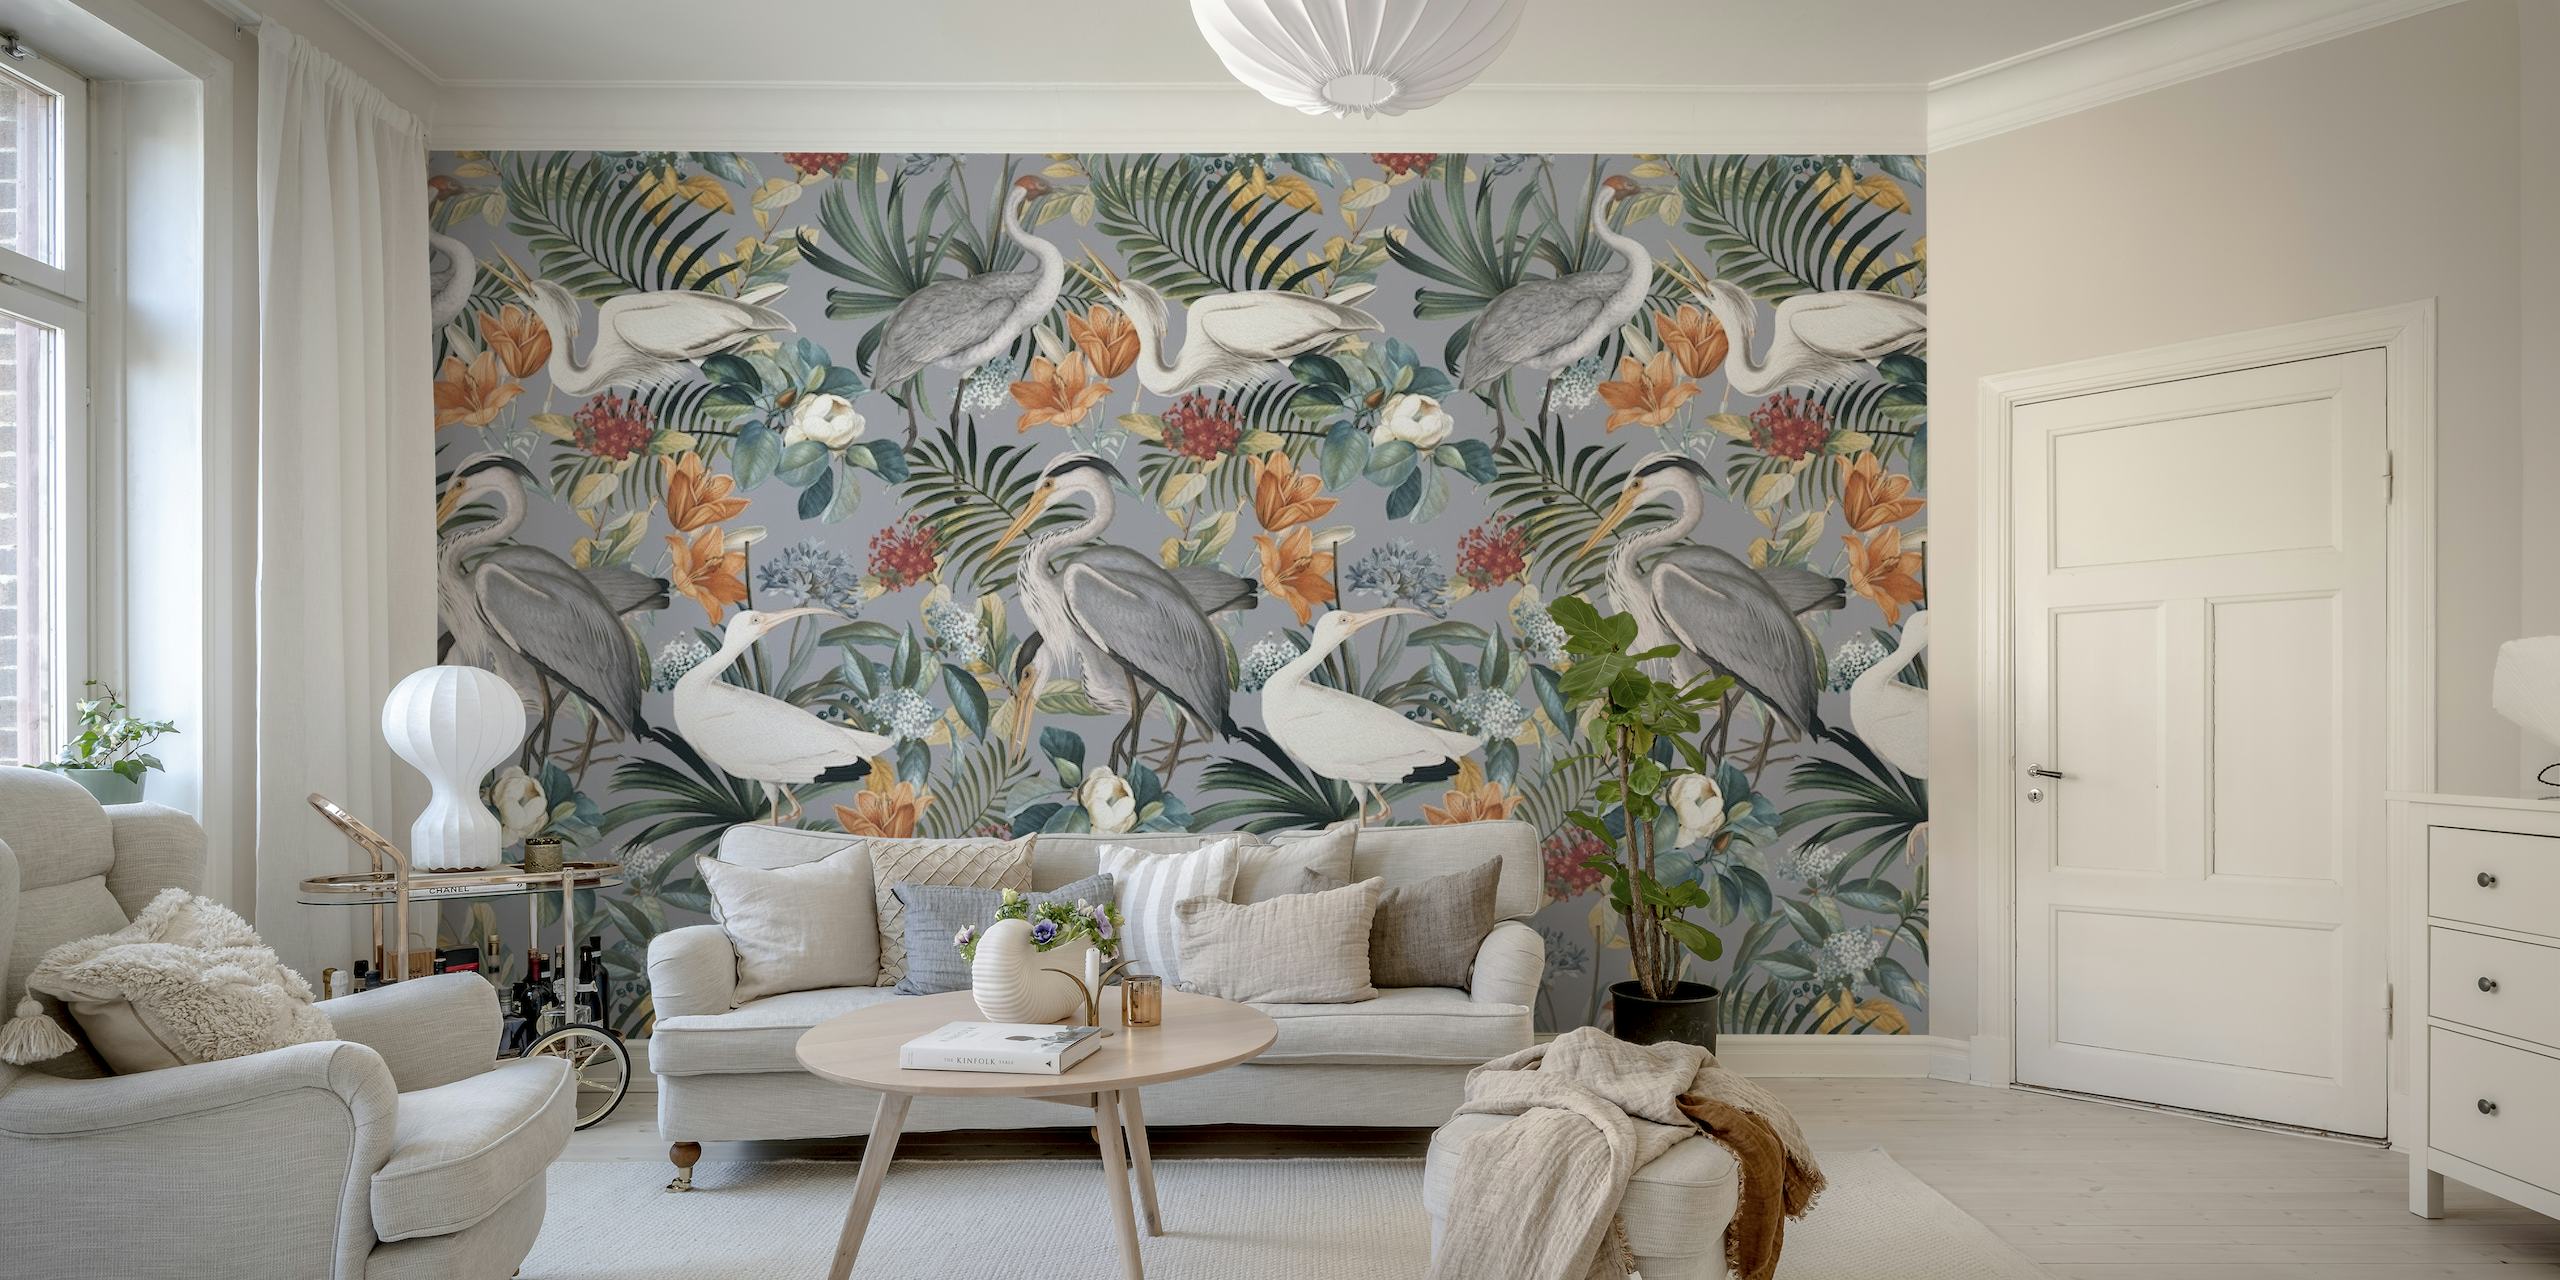 A tranquil garden scene wall mural with herons, lush greenery, and colorful flowers